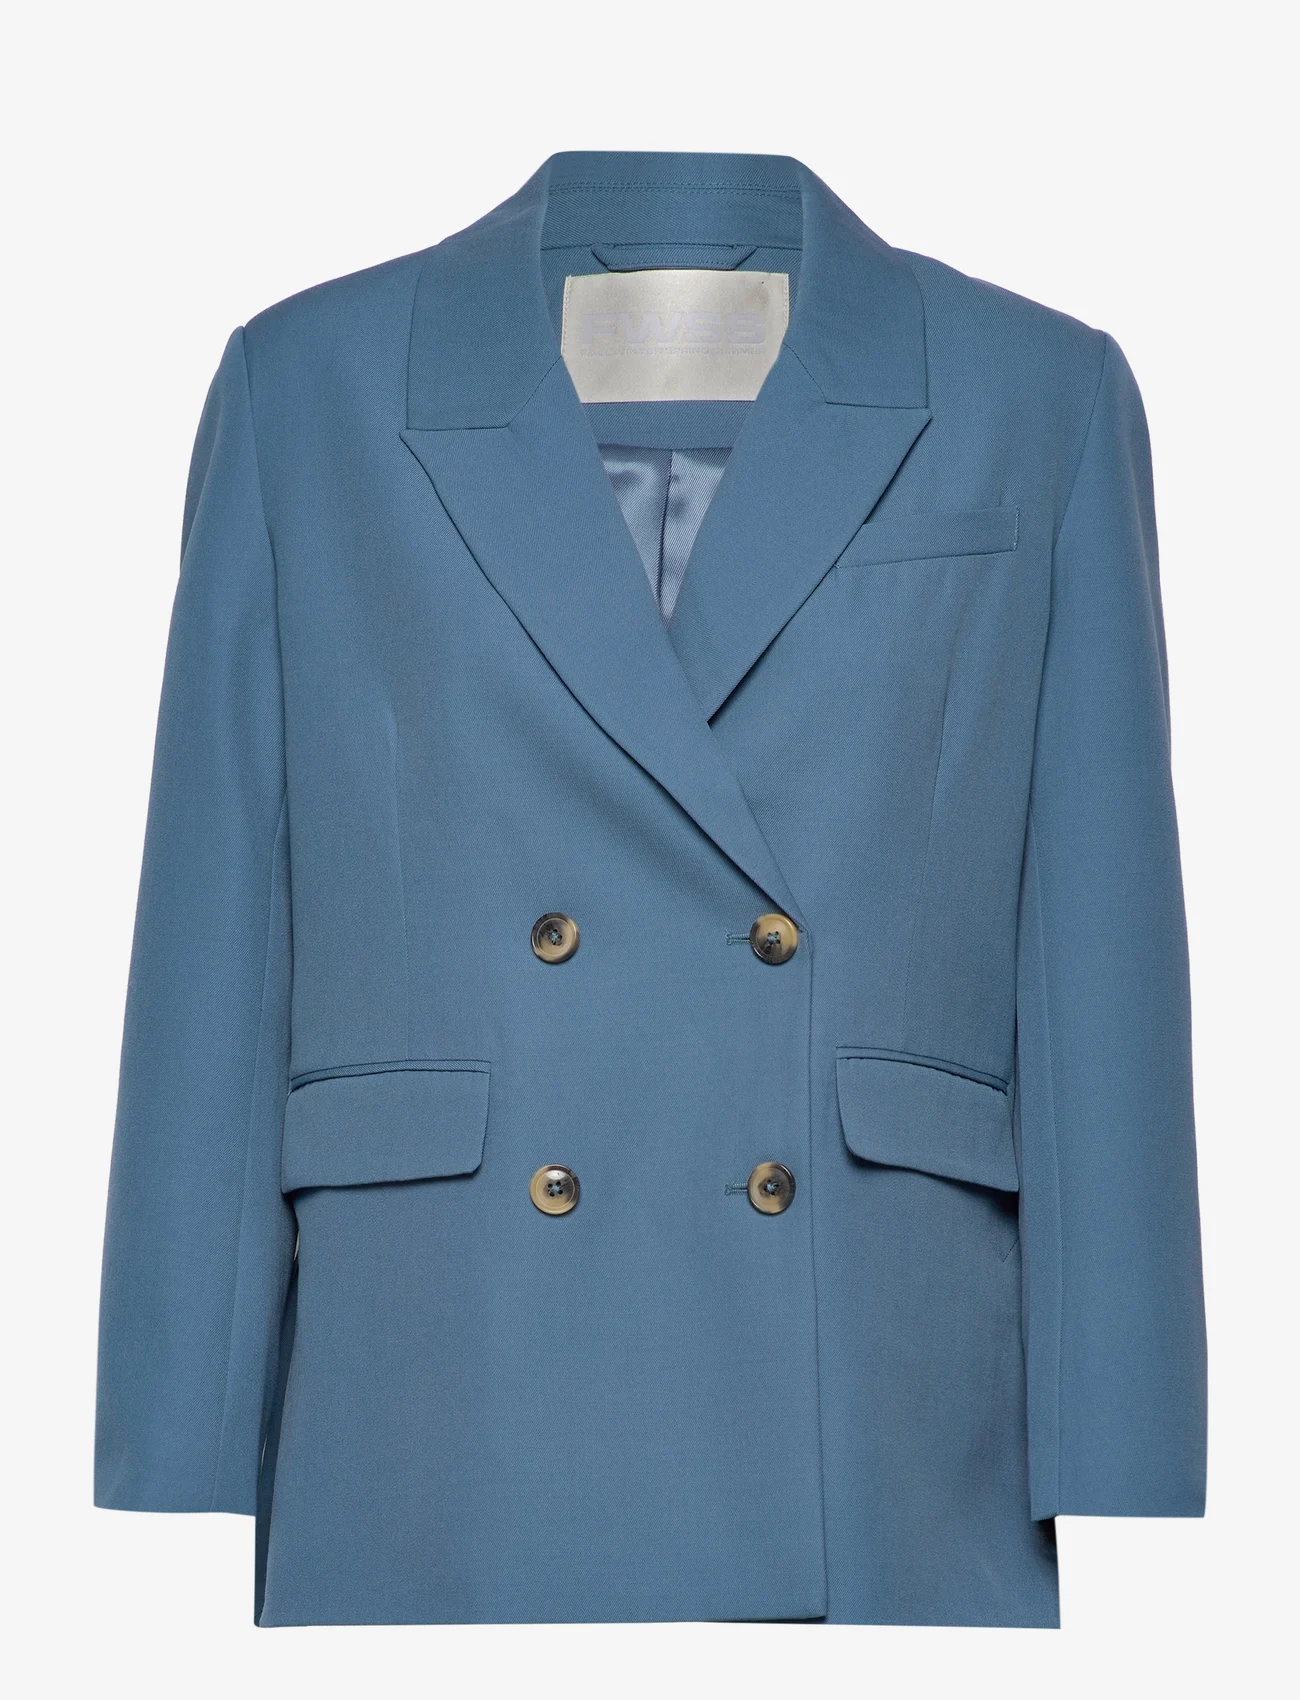 Fall Winter Spring Summer - Blue Line Blazer - party wear at outlet prices - aegean blue - 0